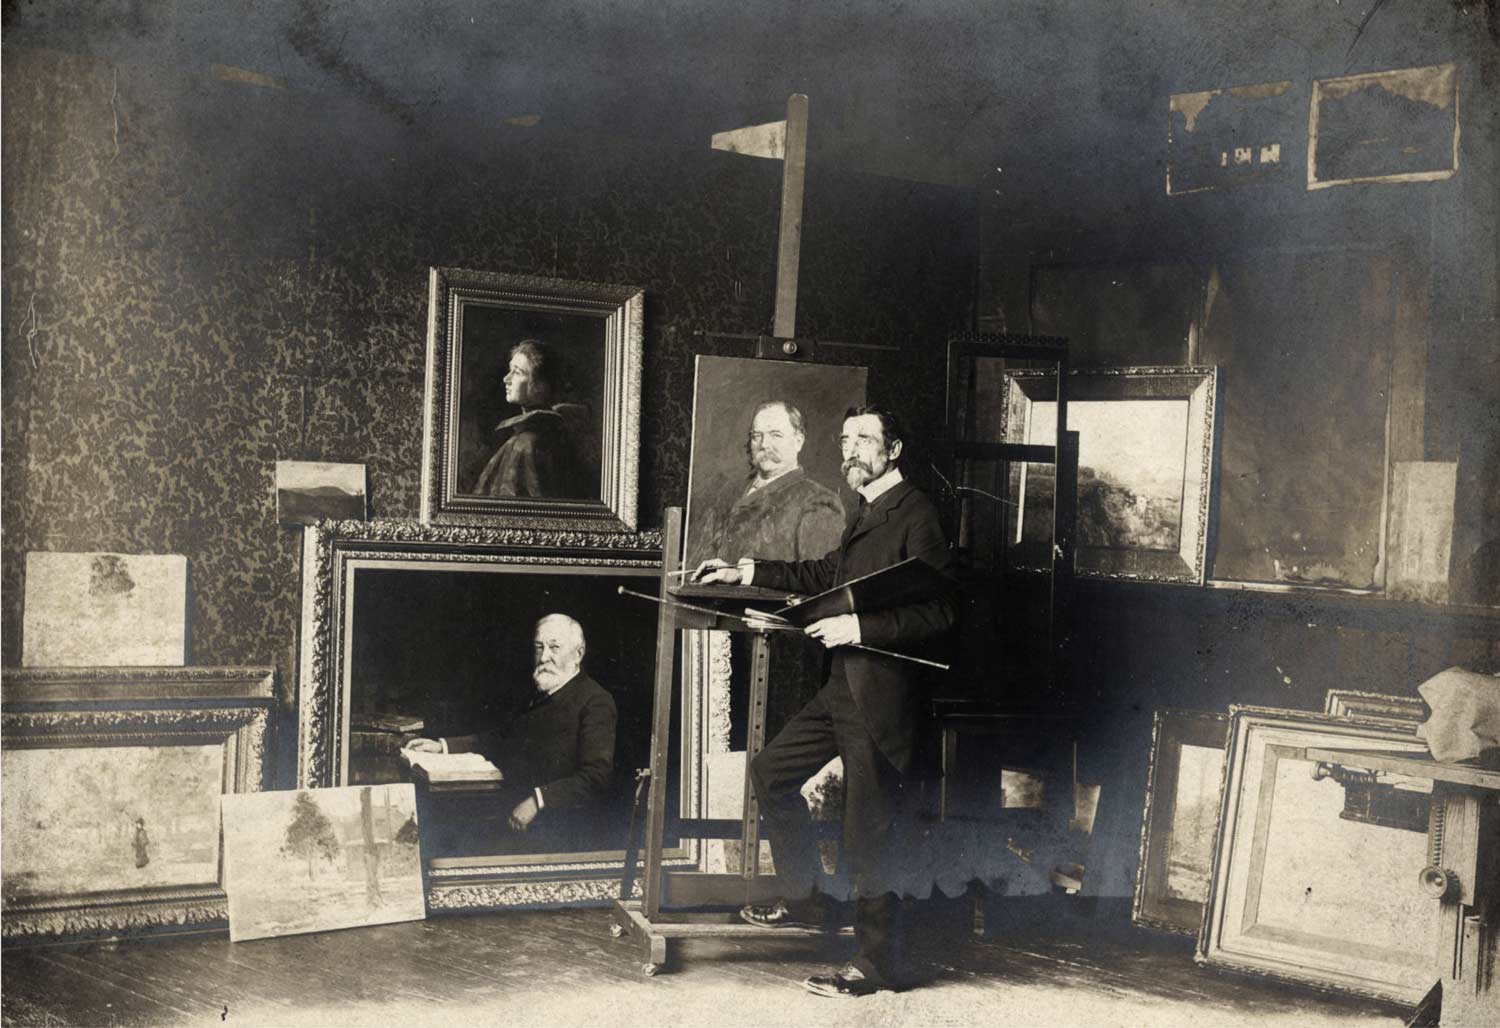 The artist stands with palette and brush in hand in front of a portrait on an easel. many paintings surround him.